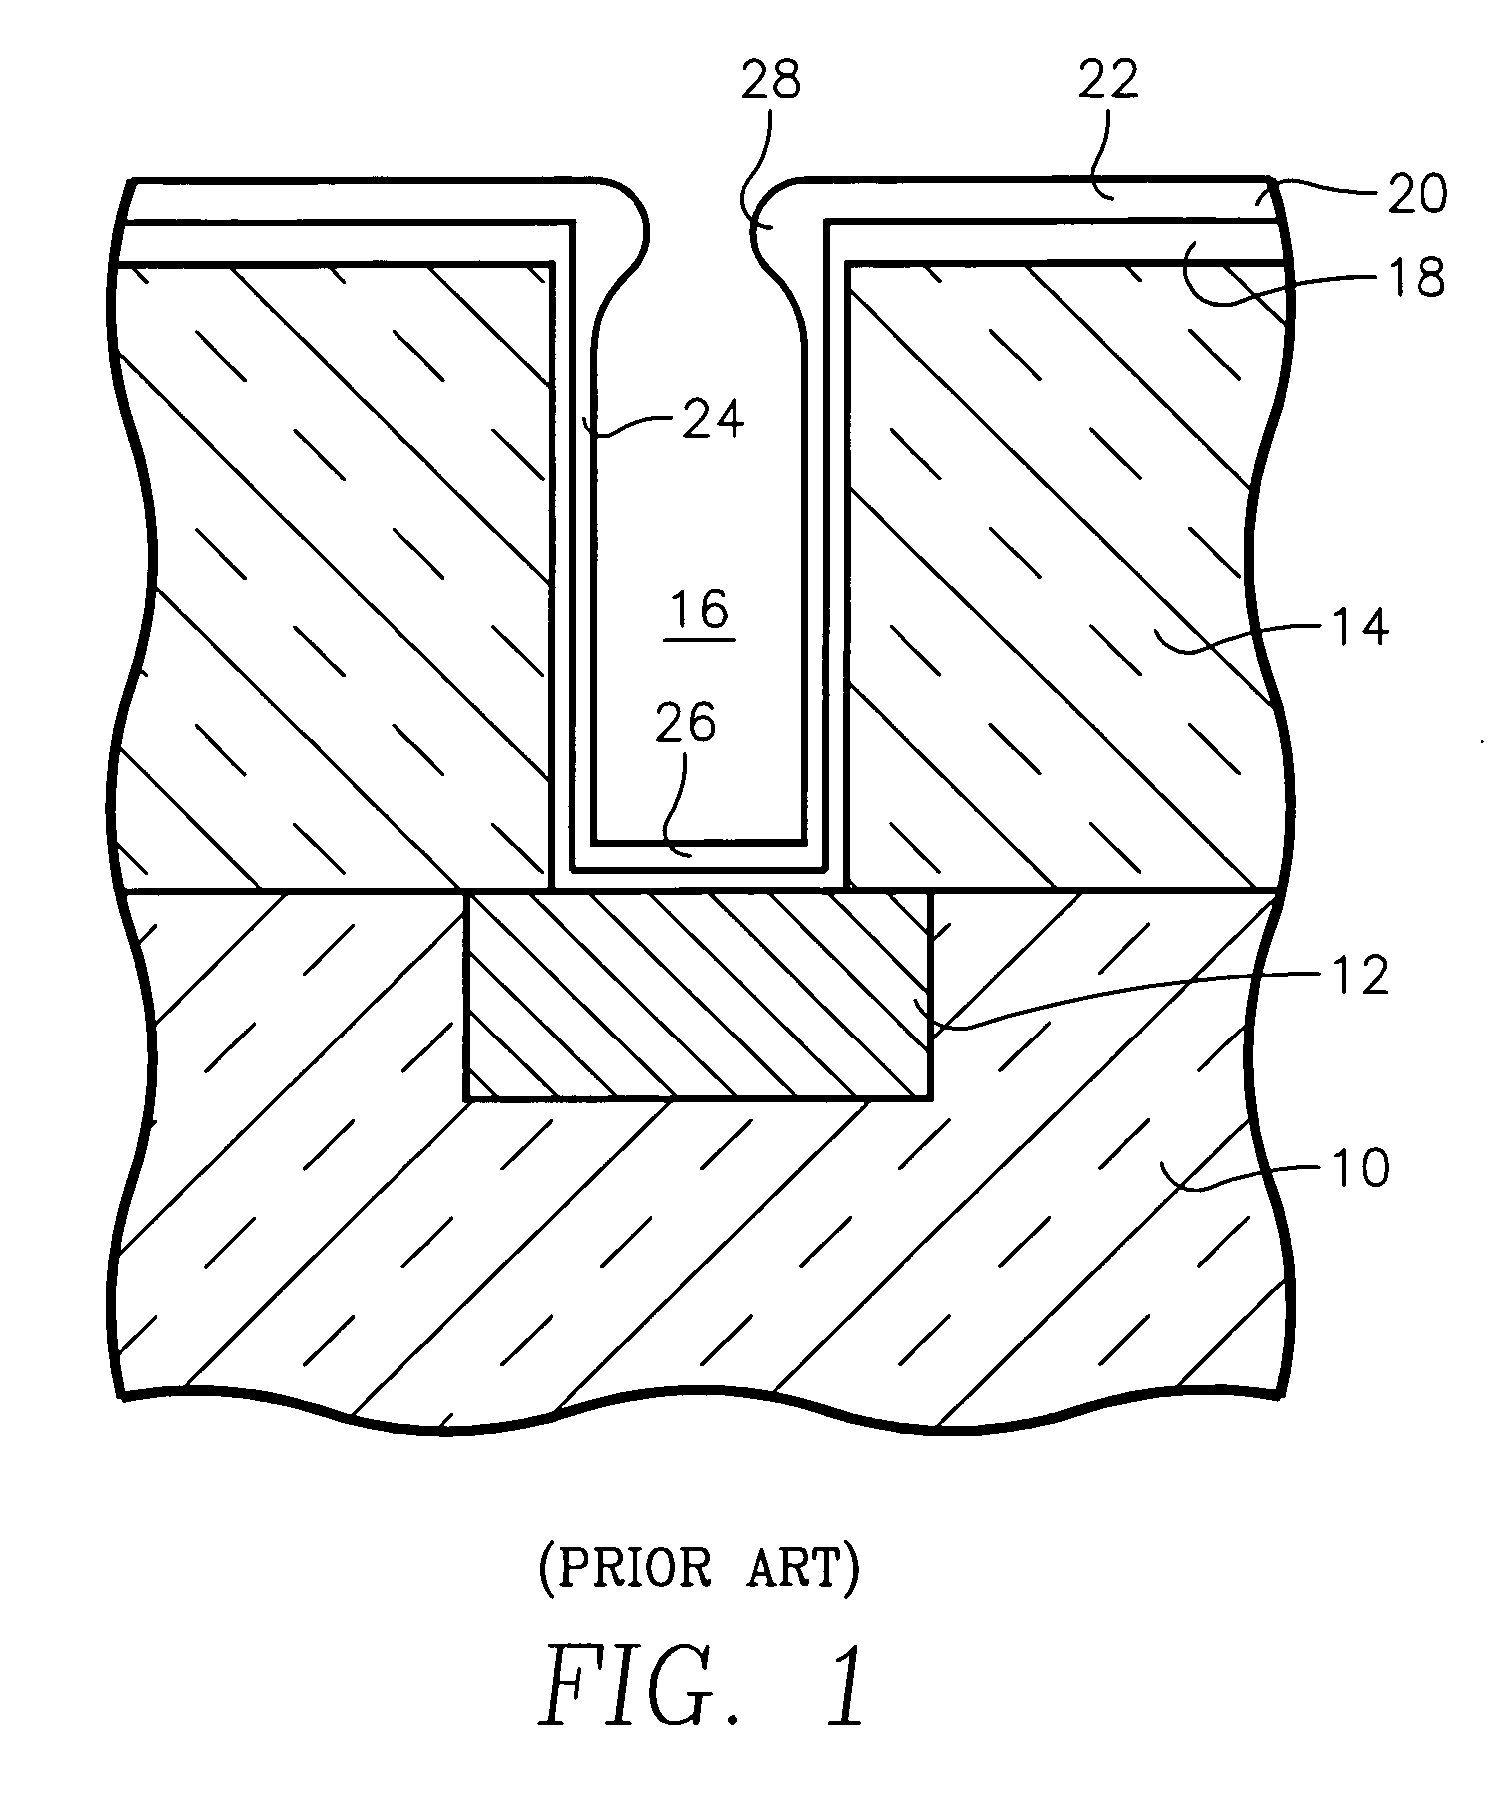 Sputter deposition and etching of metallization seed layer for overhang and sidewall improvement